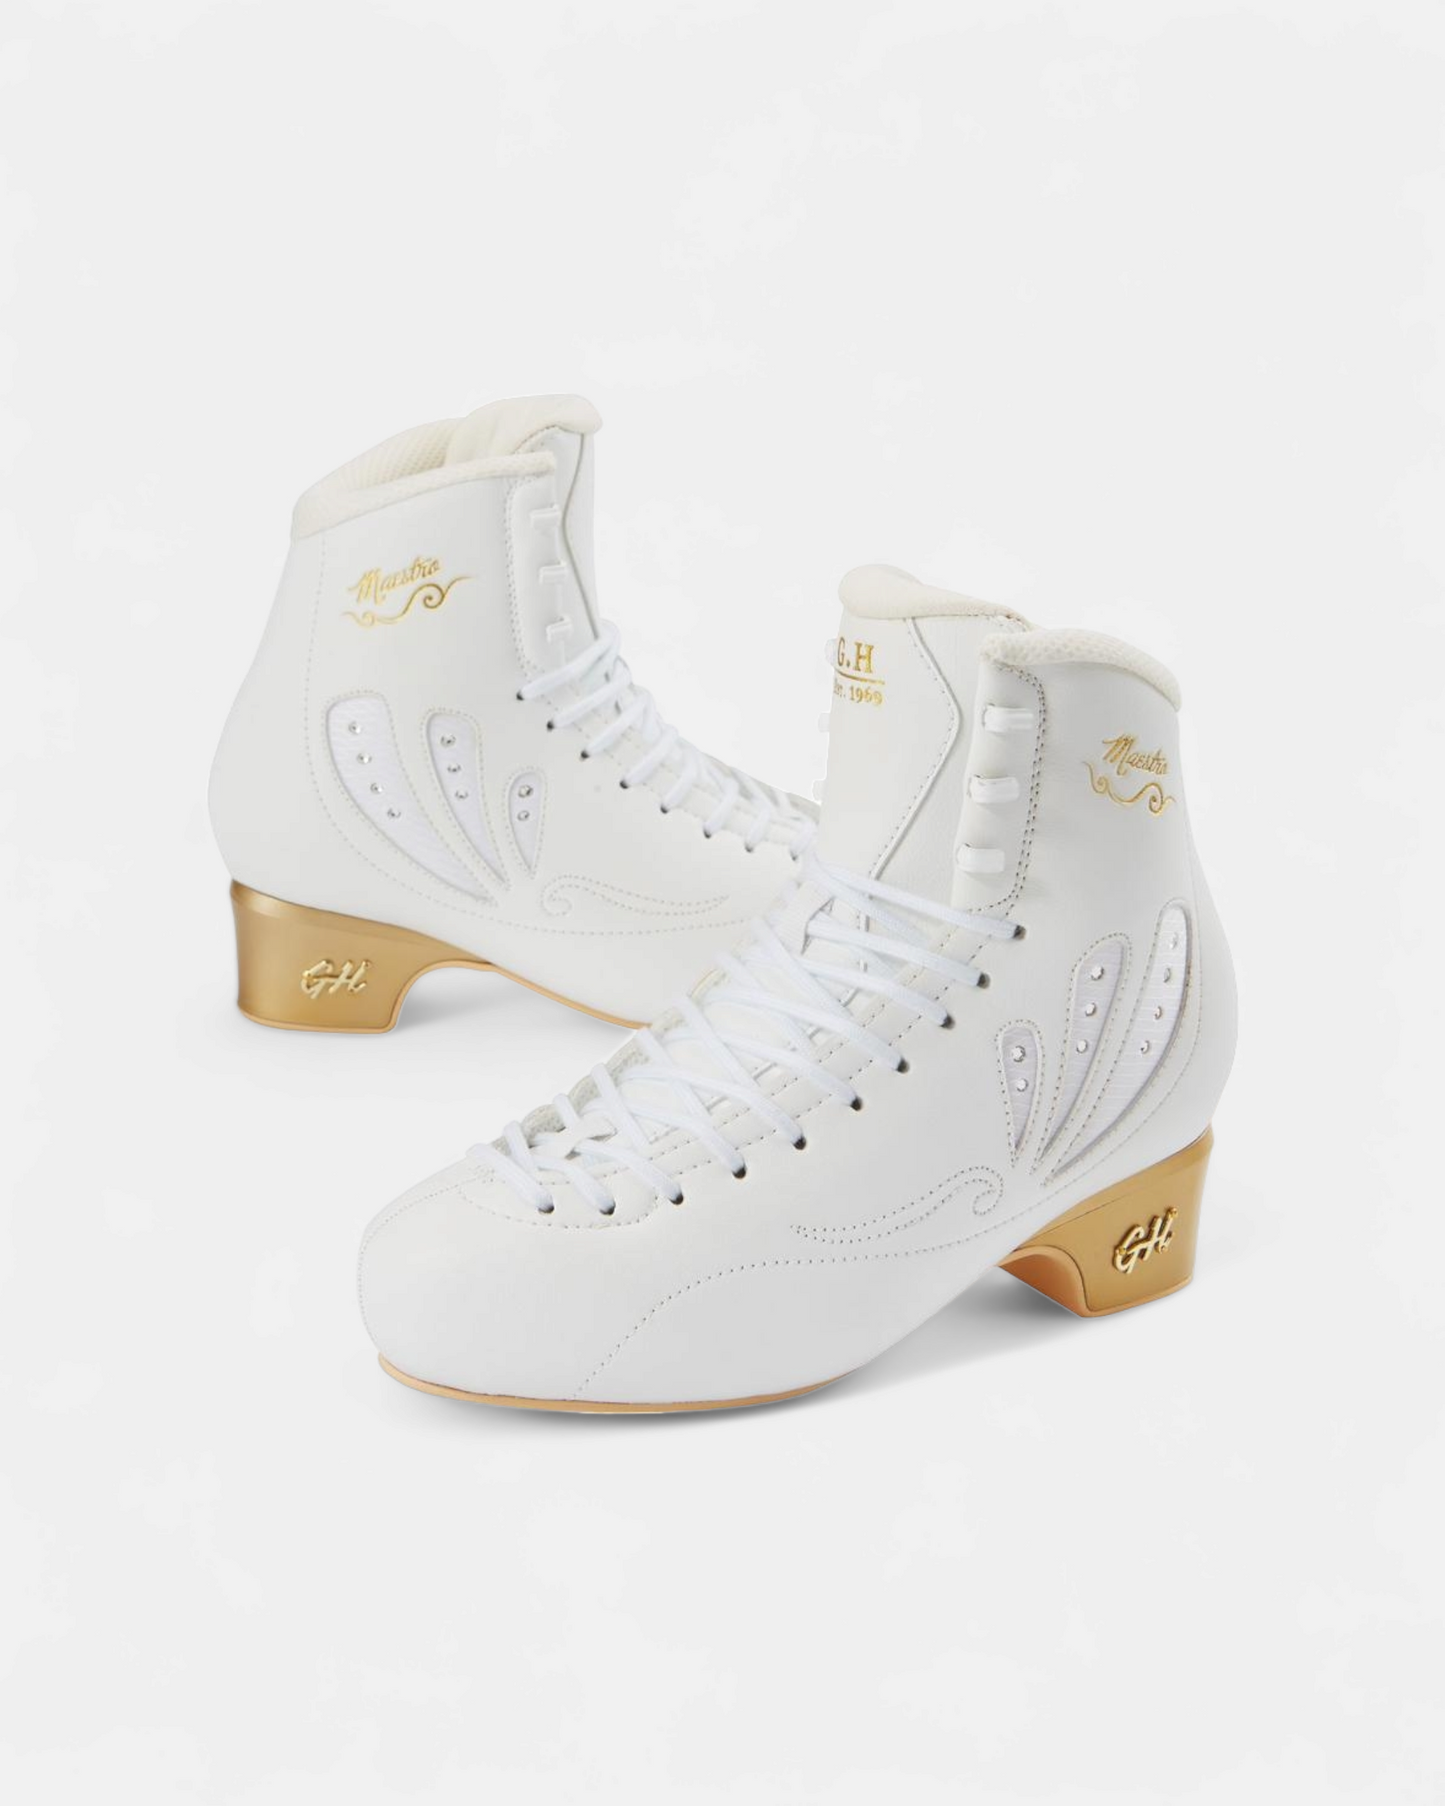 Maestro Ice Skates (Boots Only)